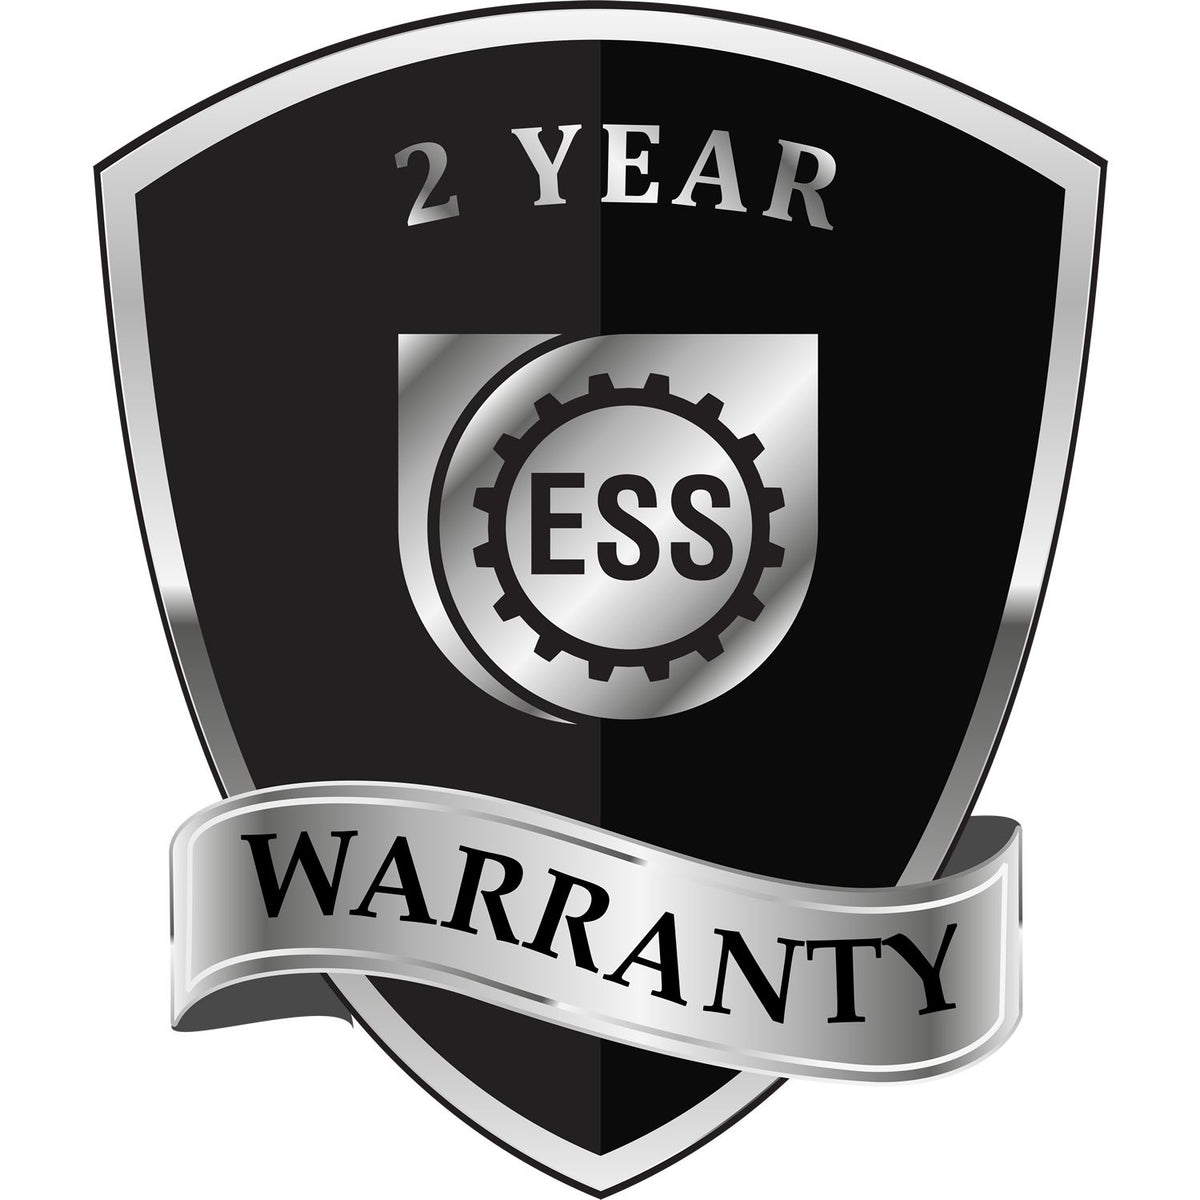 A badge or emblem showing a warranty icon for the Long Reach Georgia PE Seal